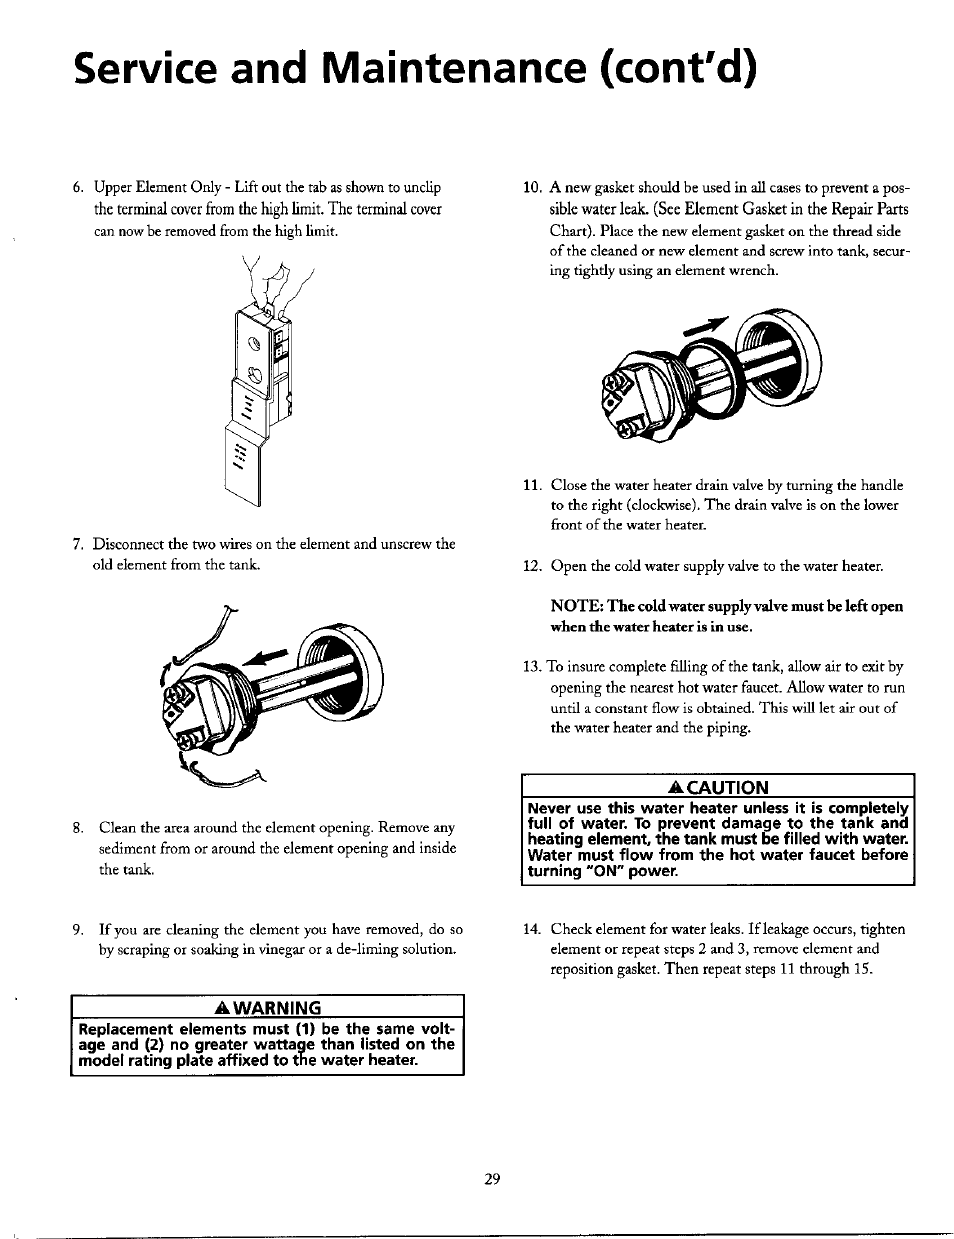 A warning, Service and maintenance (cont'd) | Maytag HE21250PC User Manual | Page 29 / 40